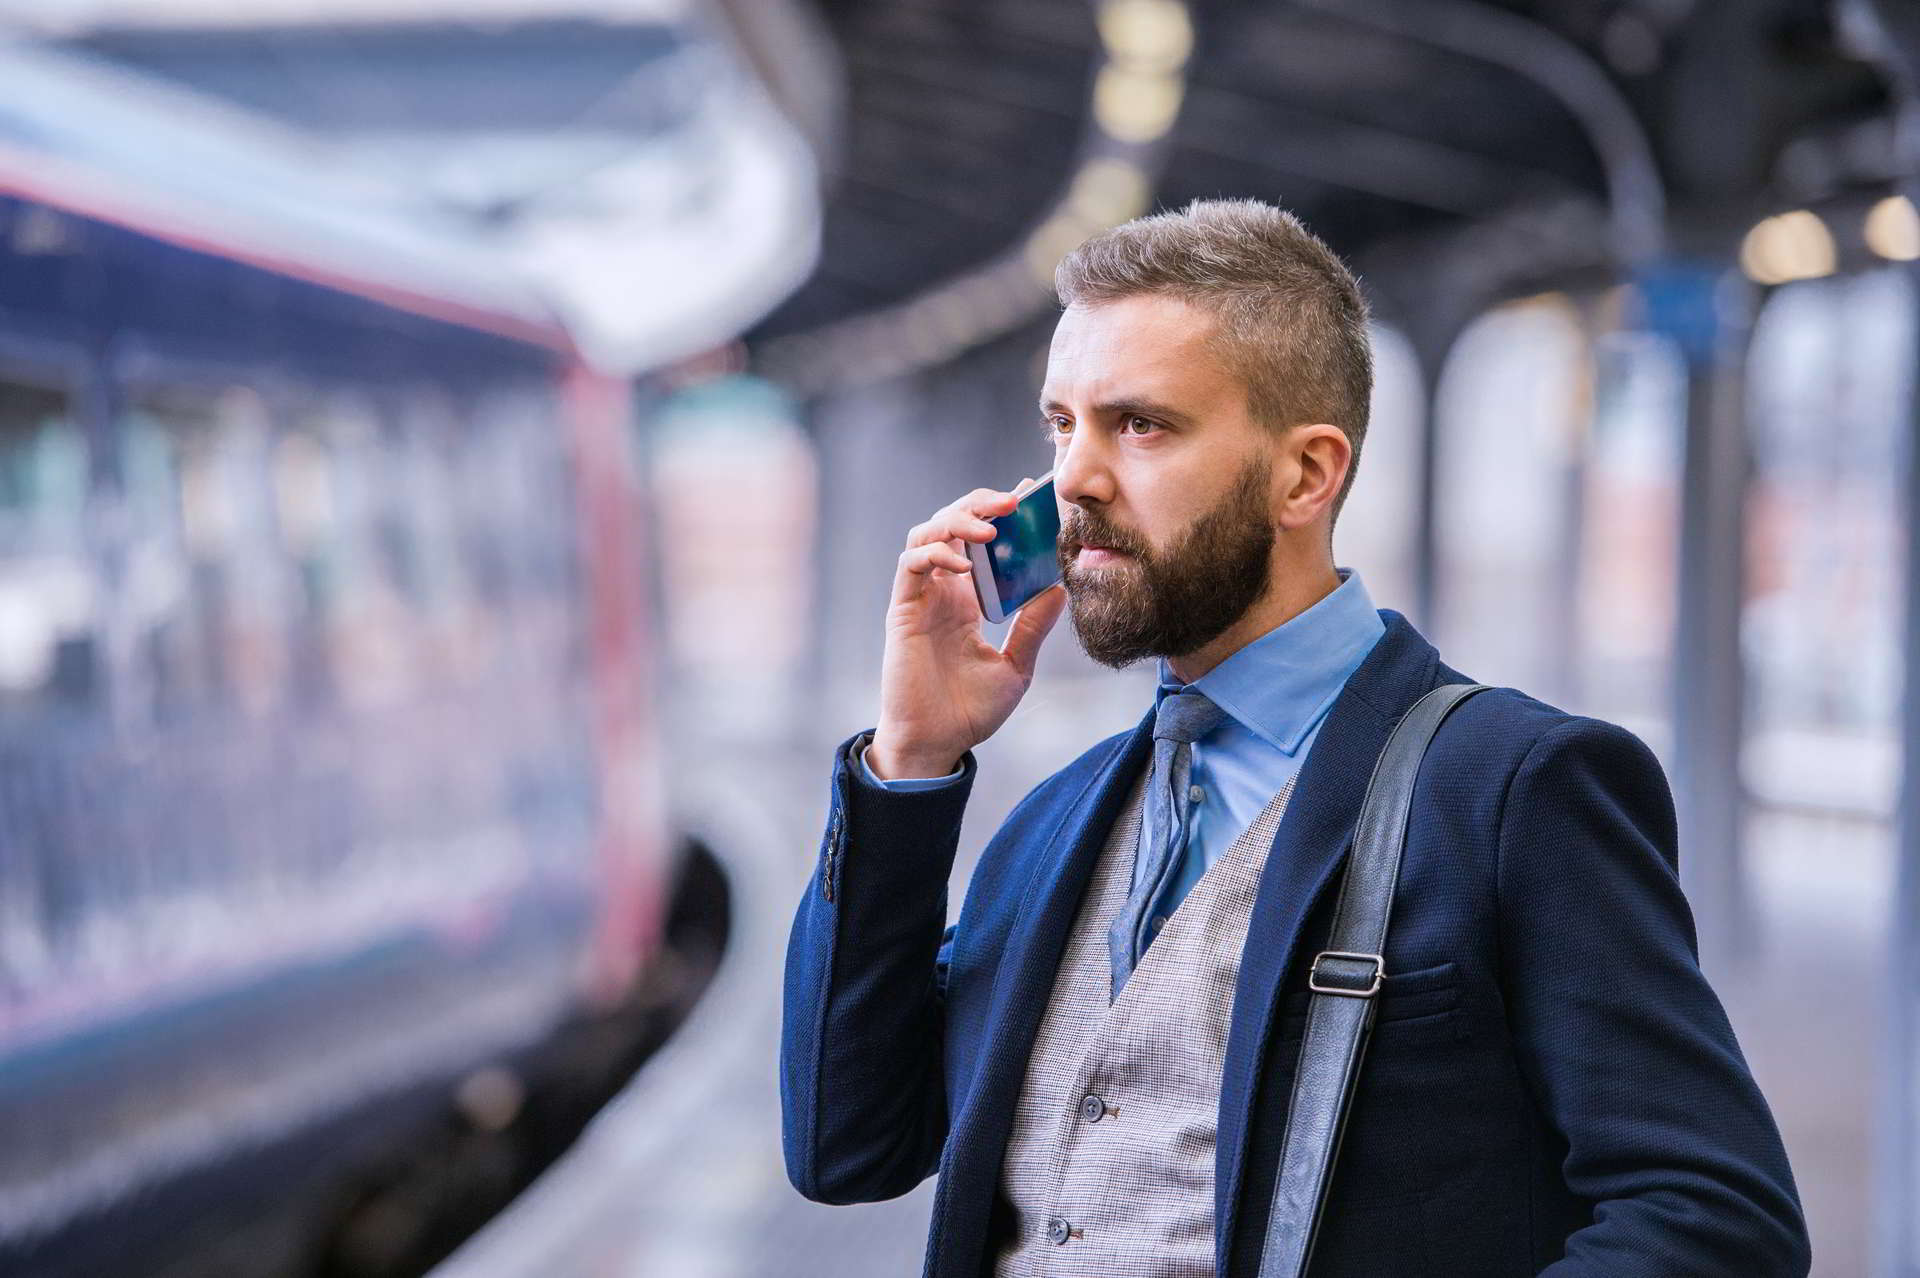 hipster businessman with smartphone making phone call walking train station